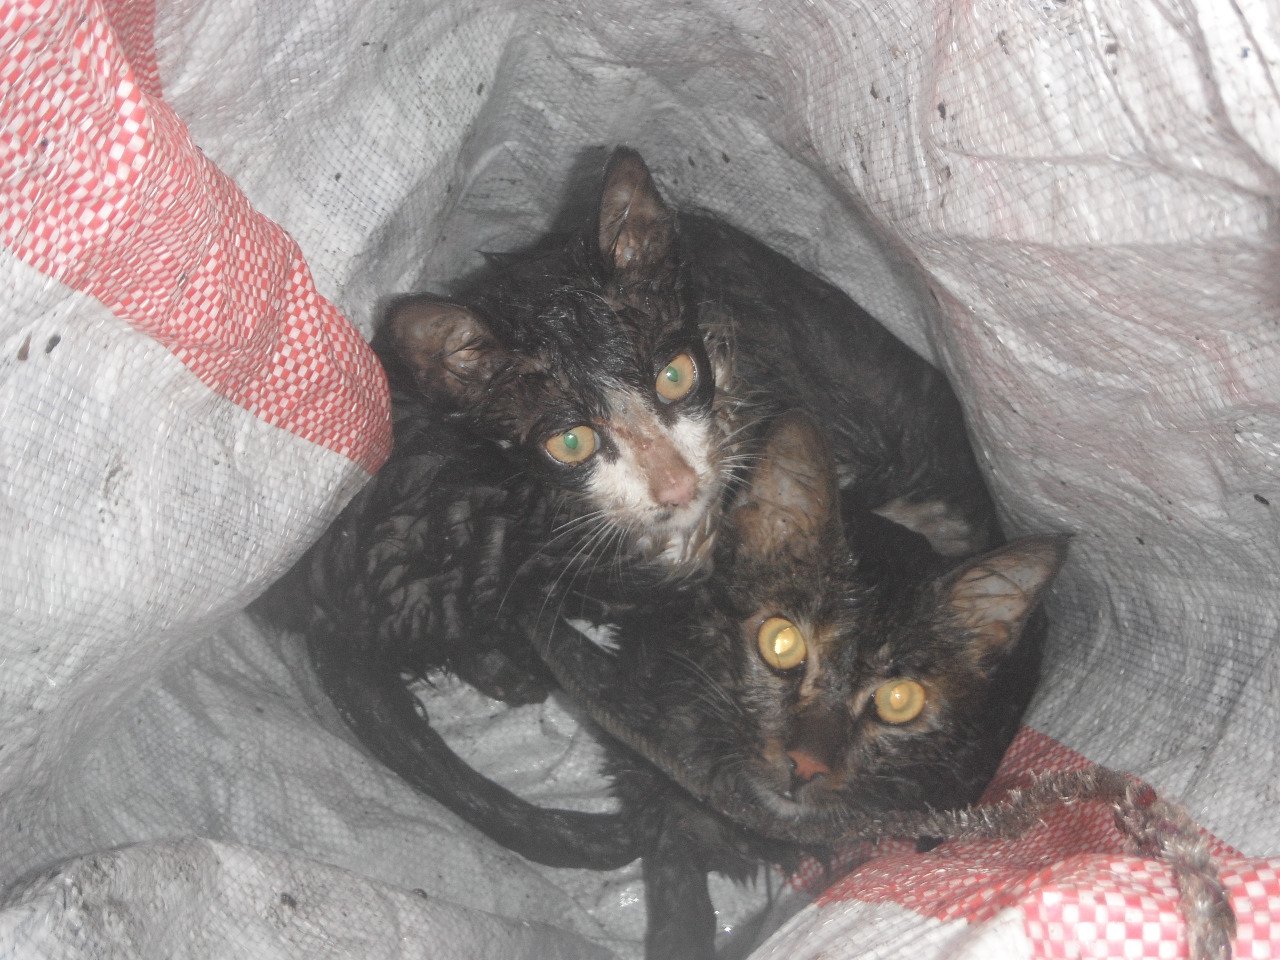 the stray cats were not hurt and were released in the opened photo express arsalan altaf